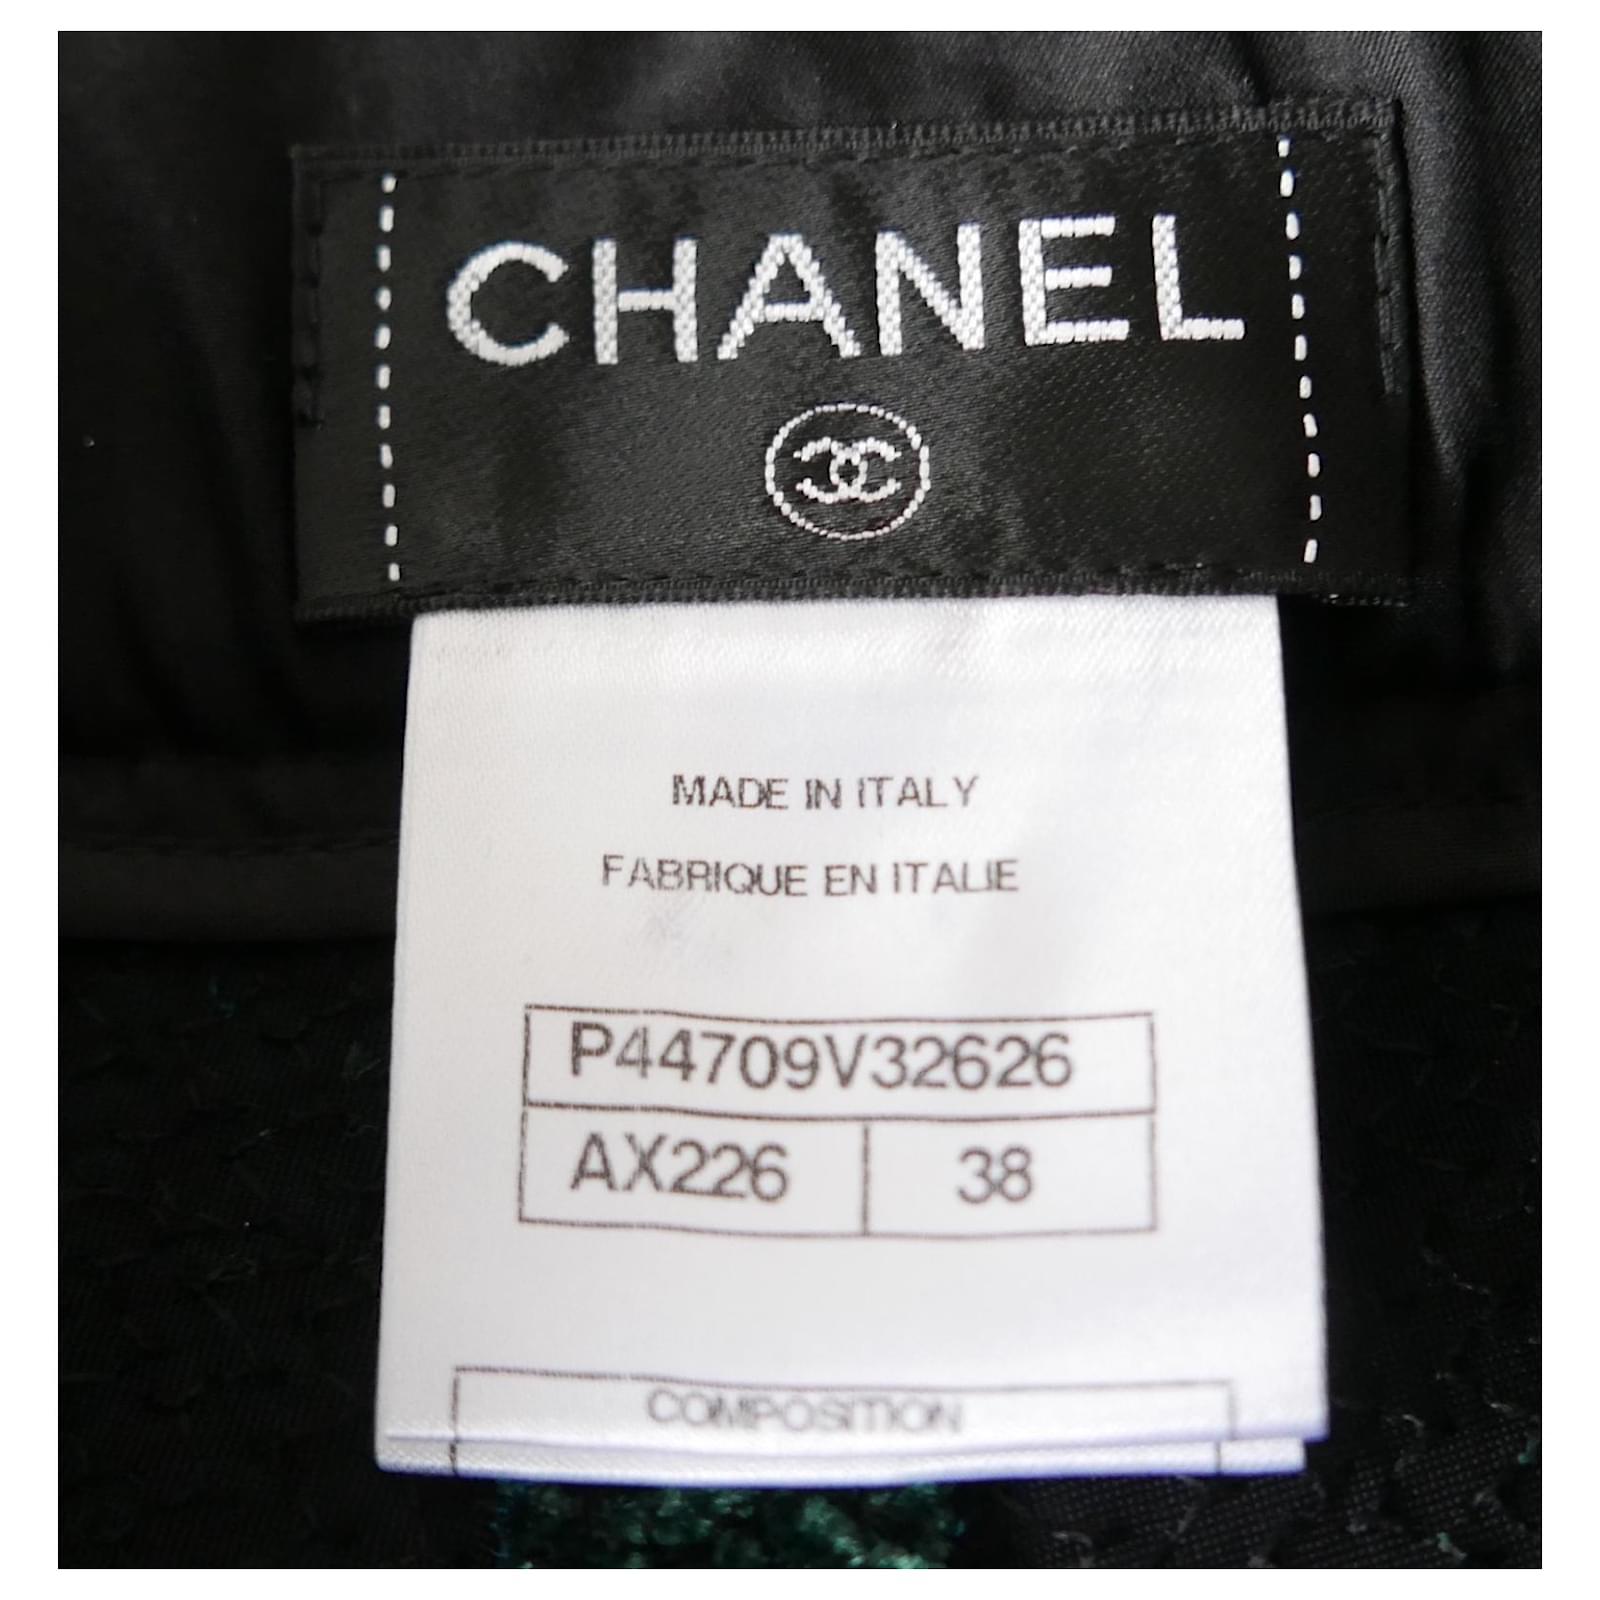 Chanel Fall 2012 Green Textured Velvet Pedal Pushers Trousers For Sale 4